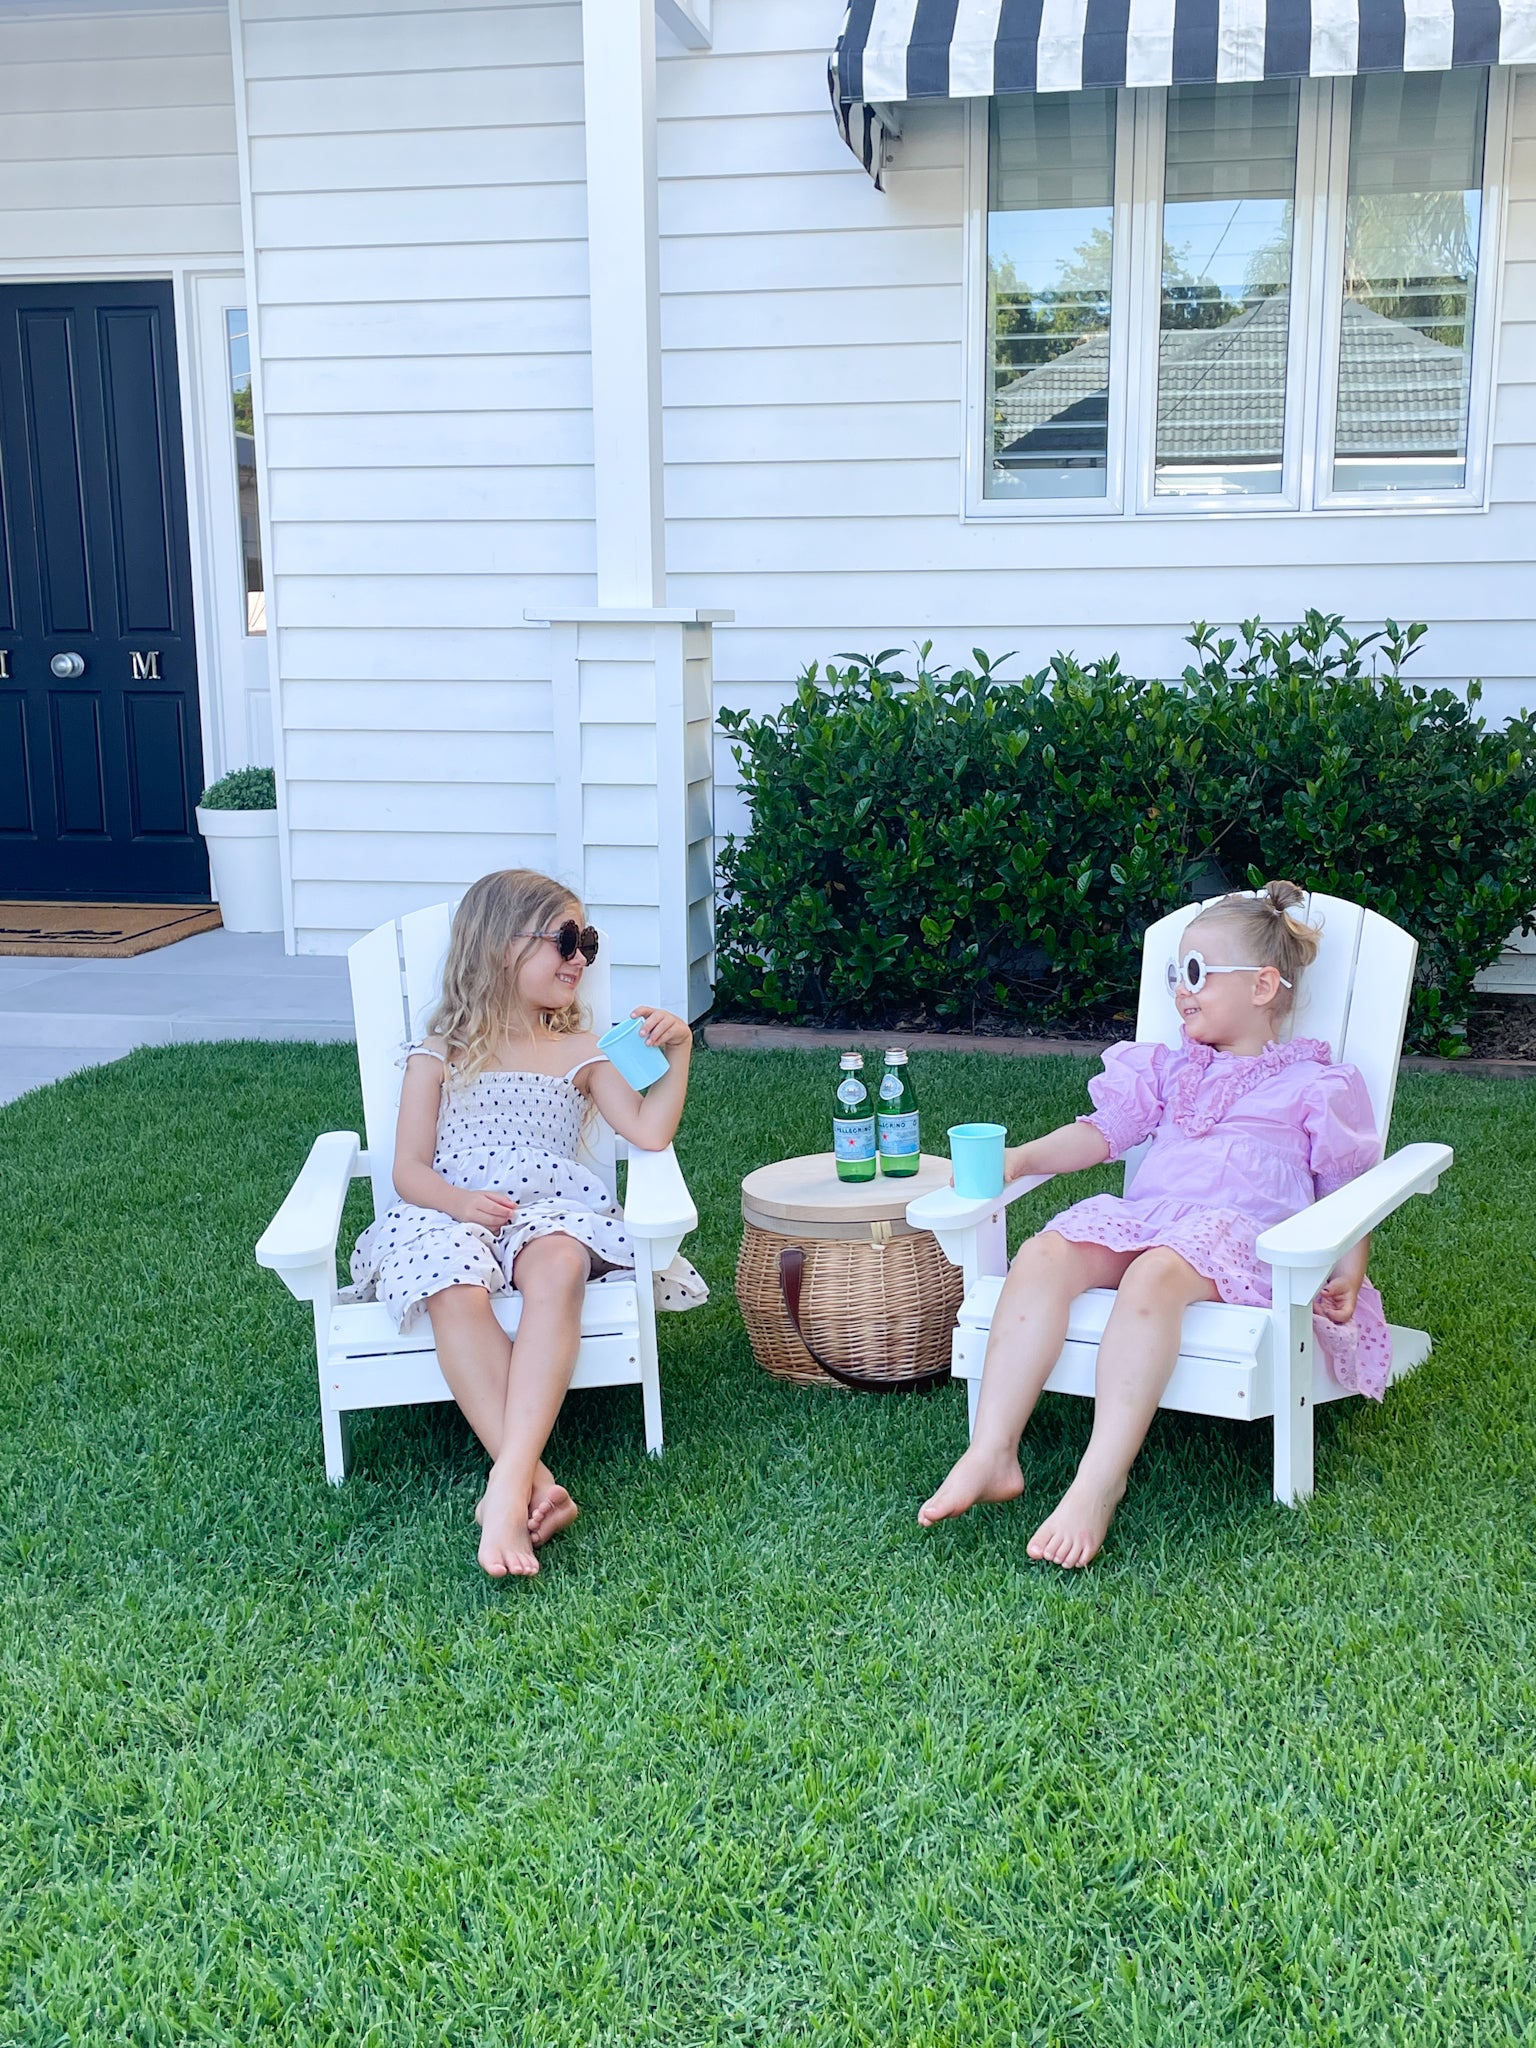 Two young girls sitting in the garden on white children's Adirondack Chairs